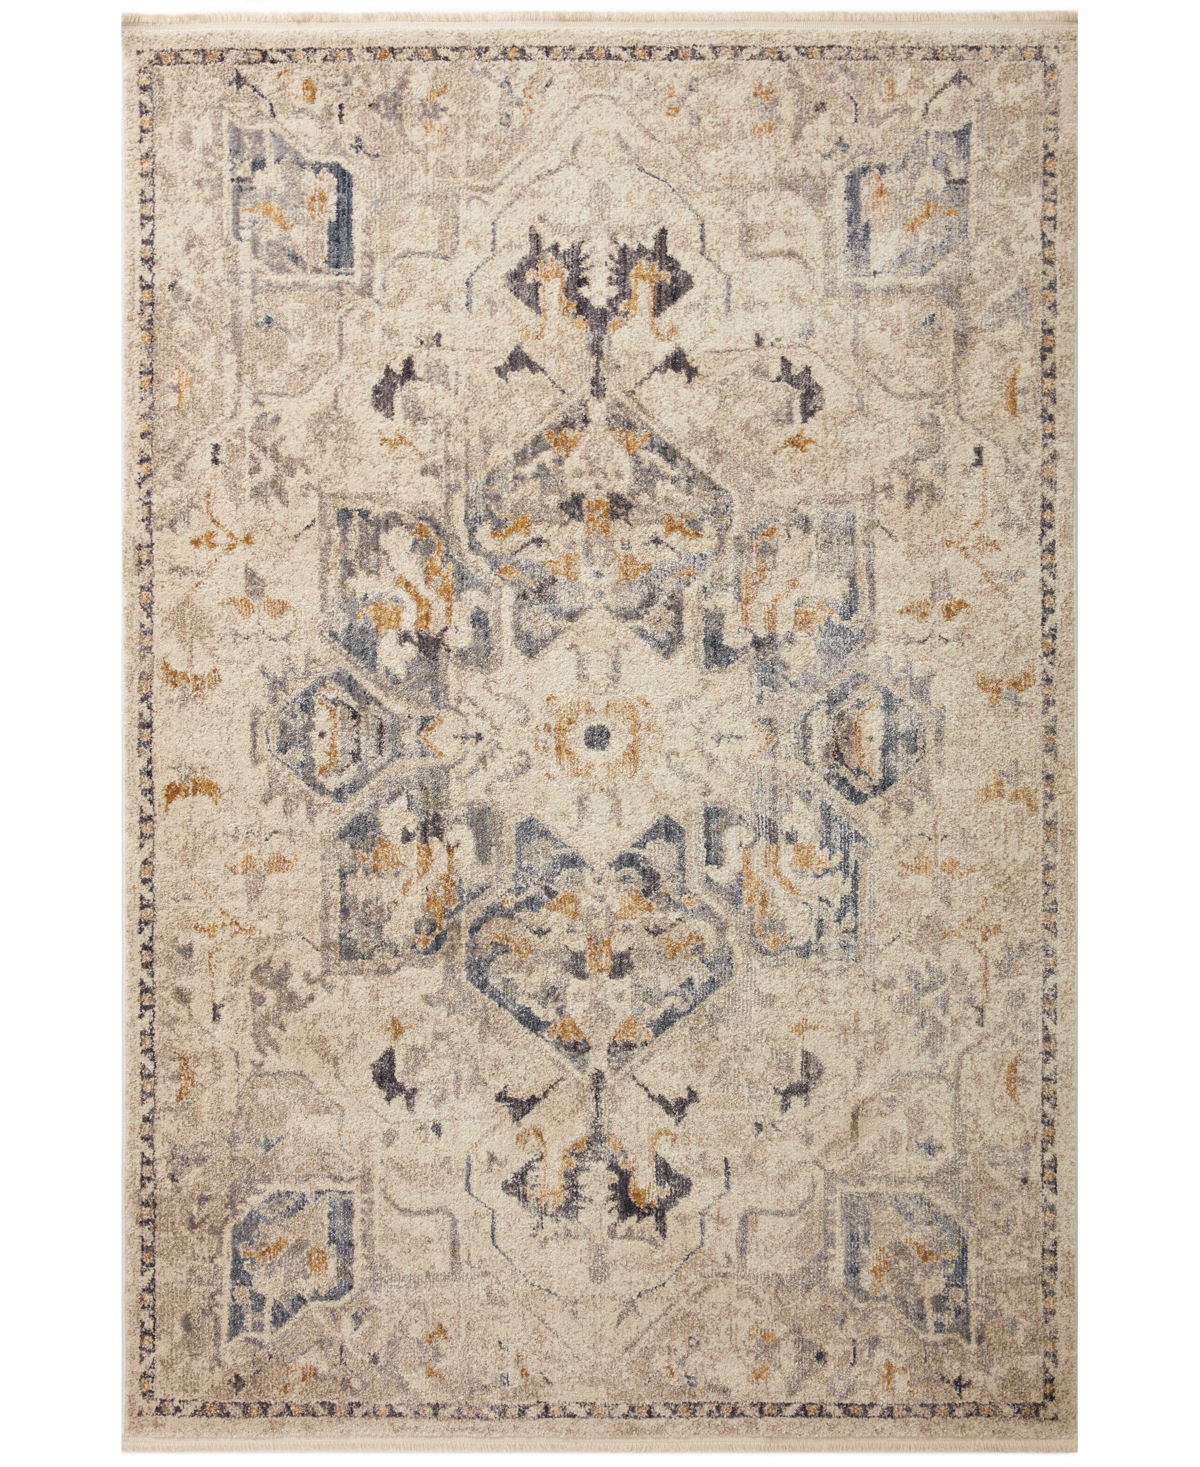 Magnolia Home By Joanna Gaines X Loloi Janey Jay-01 5'3" X 7'8" Area Rug In Beige